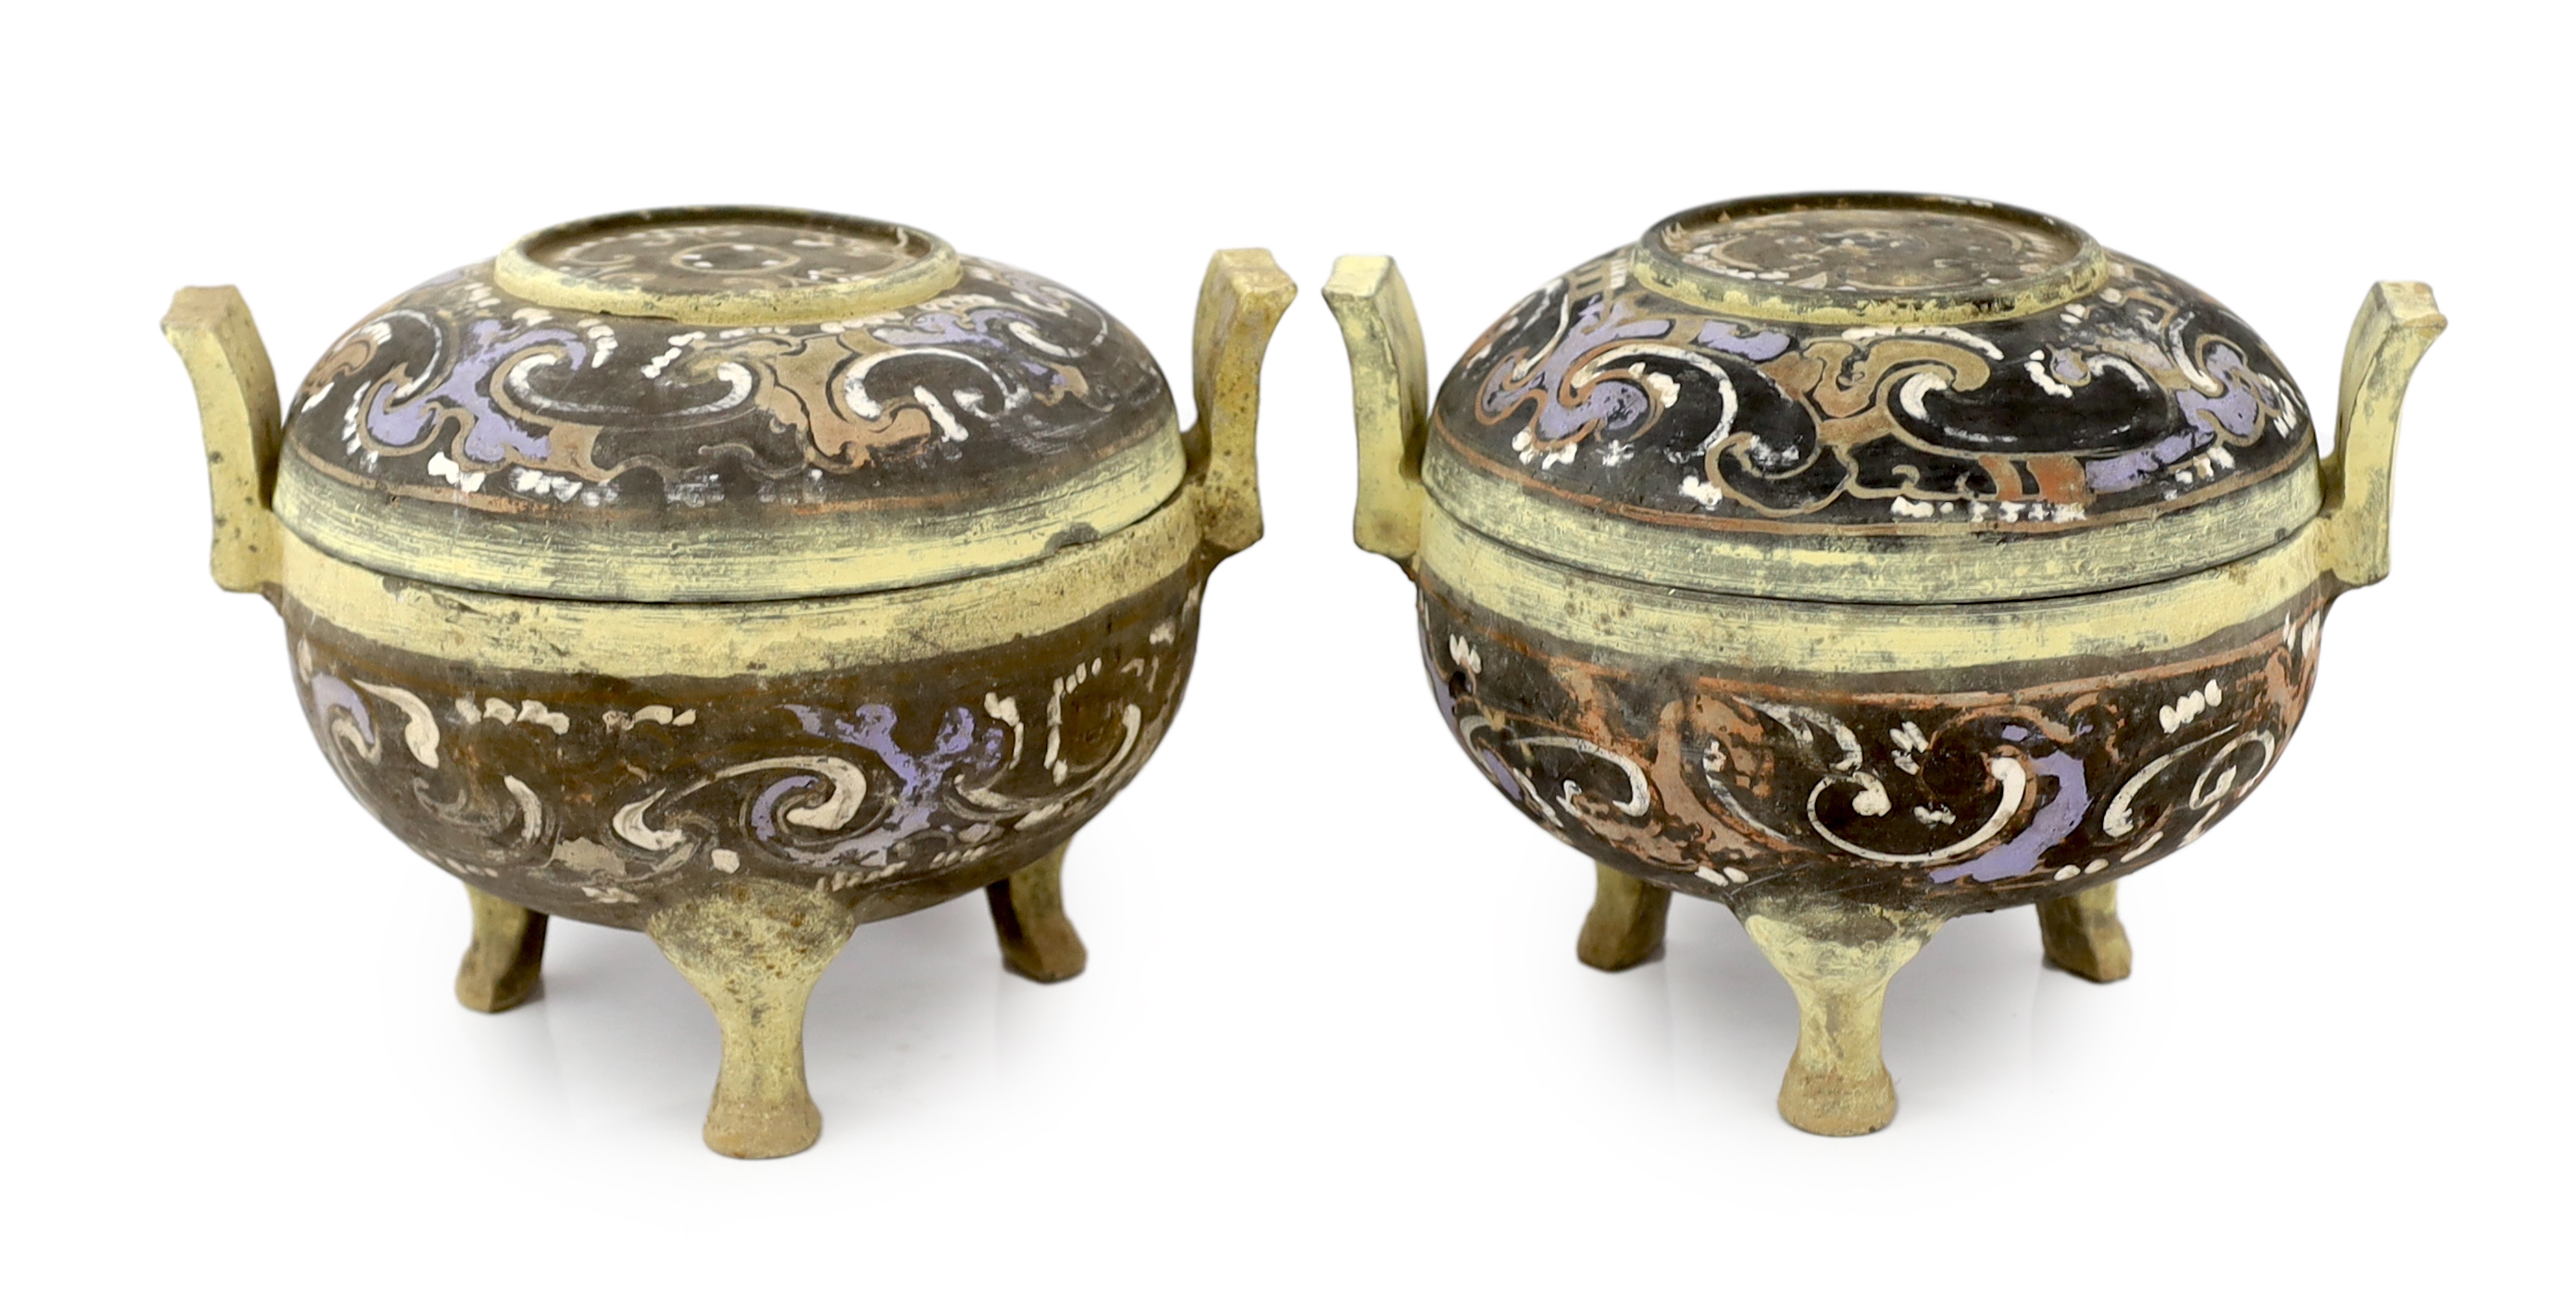 A pair of Chinese polychrome pottery ritual tripod vessels and covers, ding, Han dynasty (202BC - 220AD)                                                                                                                    